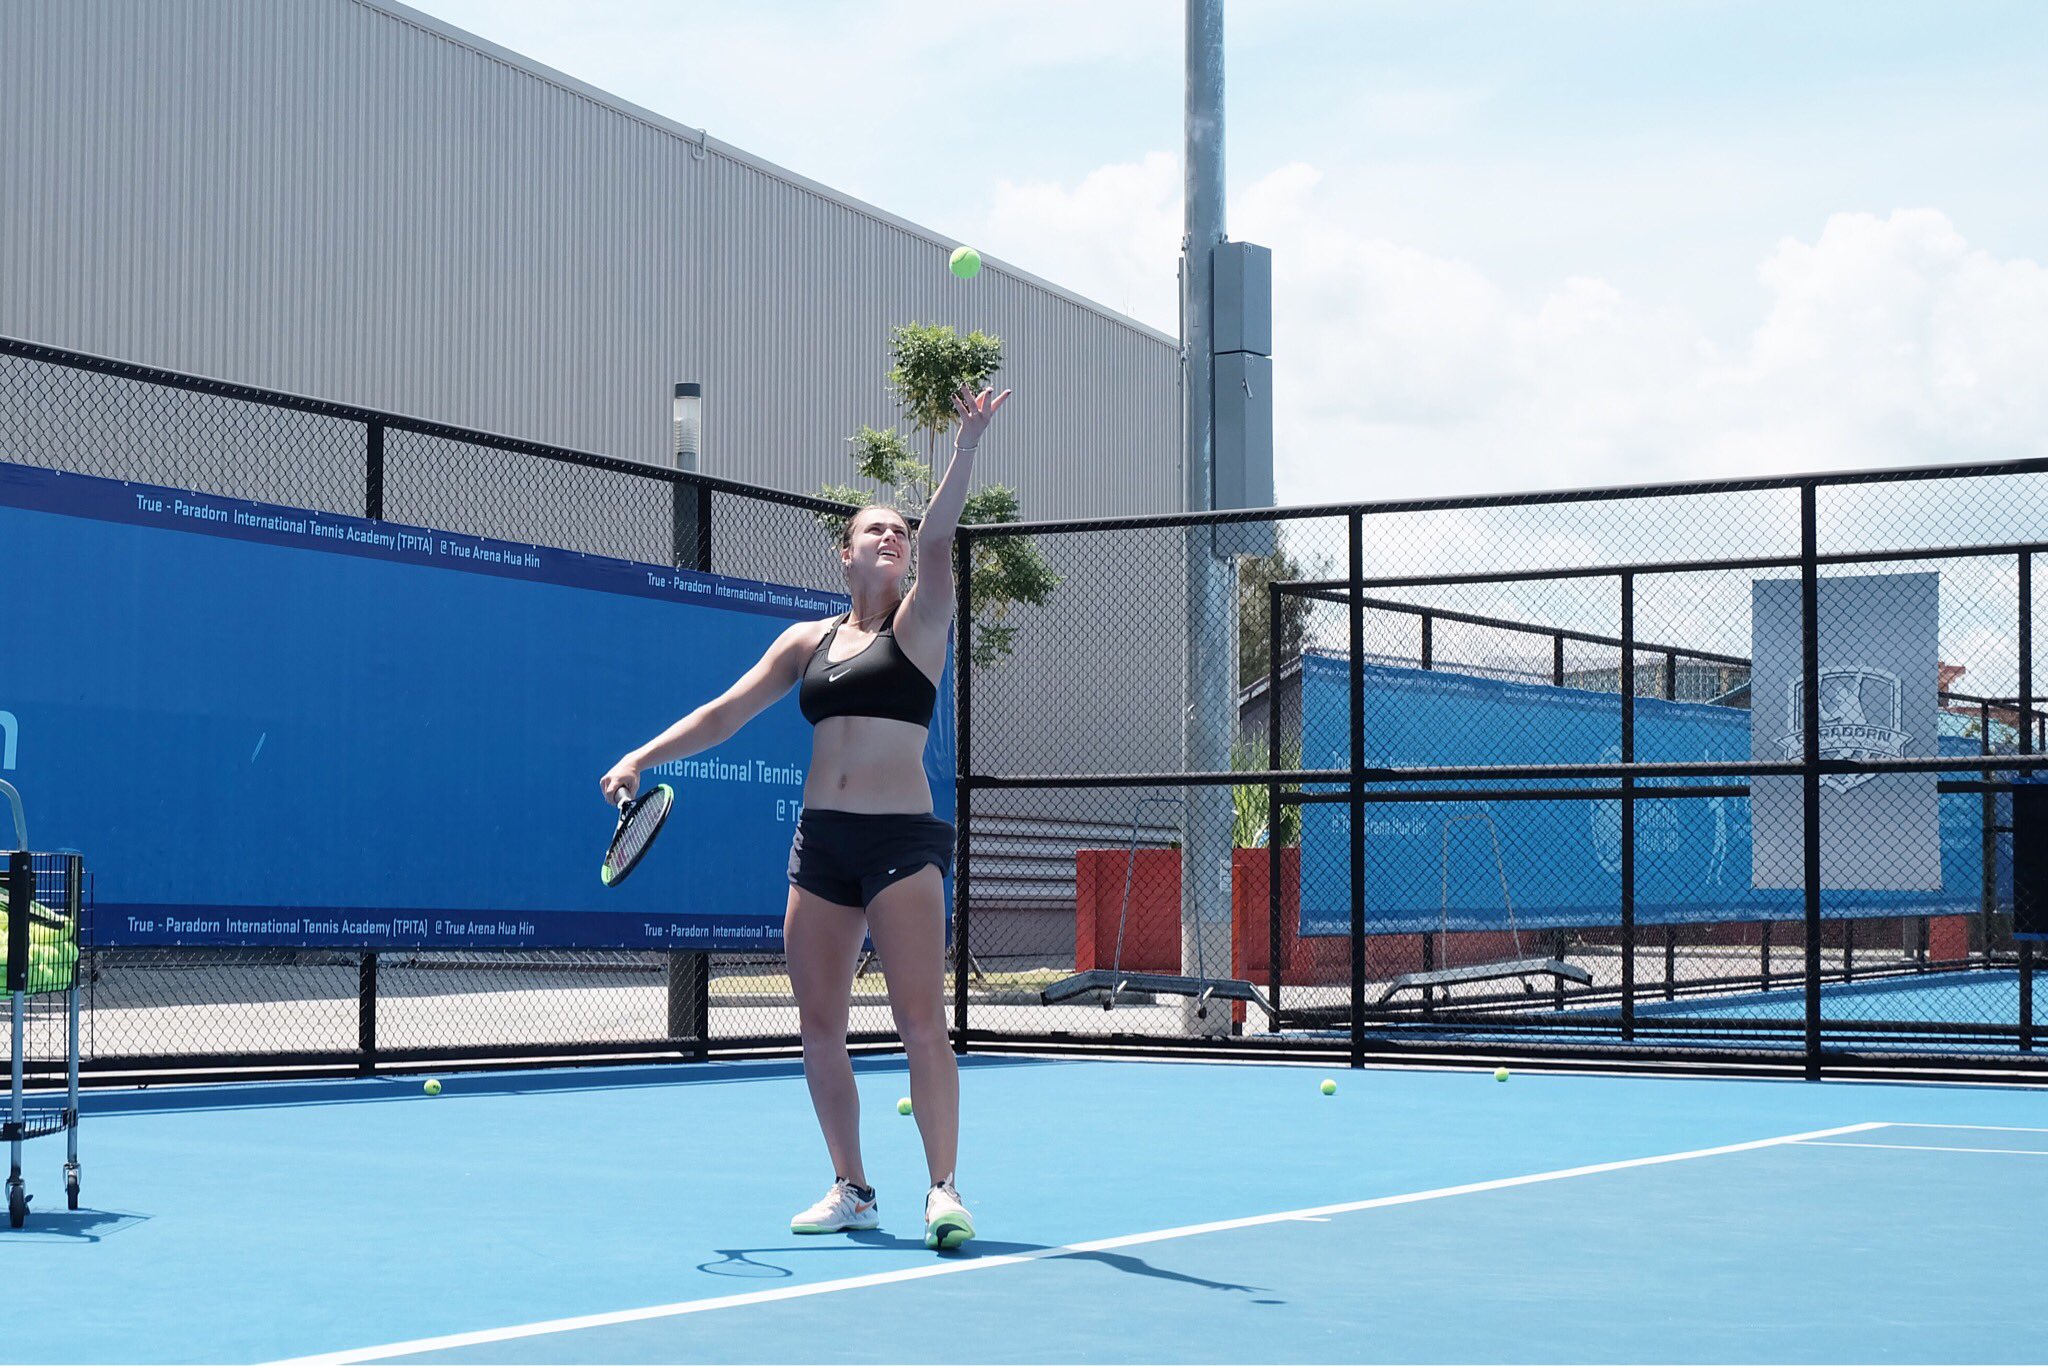 Du bliver bedre Modsige sengetøj True Arena Hua Hin Sports Club on Twitter: "Welcome world No 12 Aryna  Sabalenka of Belarus during her visit in Hua Hin recently. The tennis star  also stops by for a practice